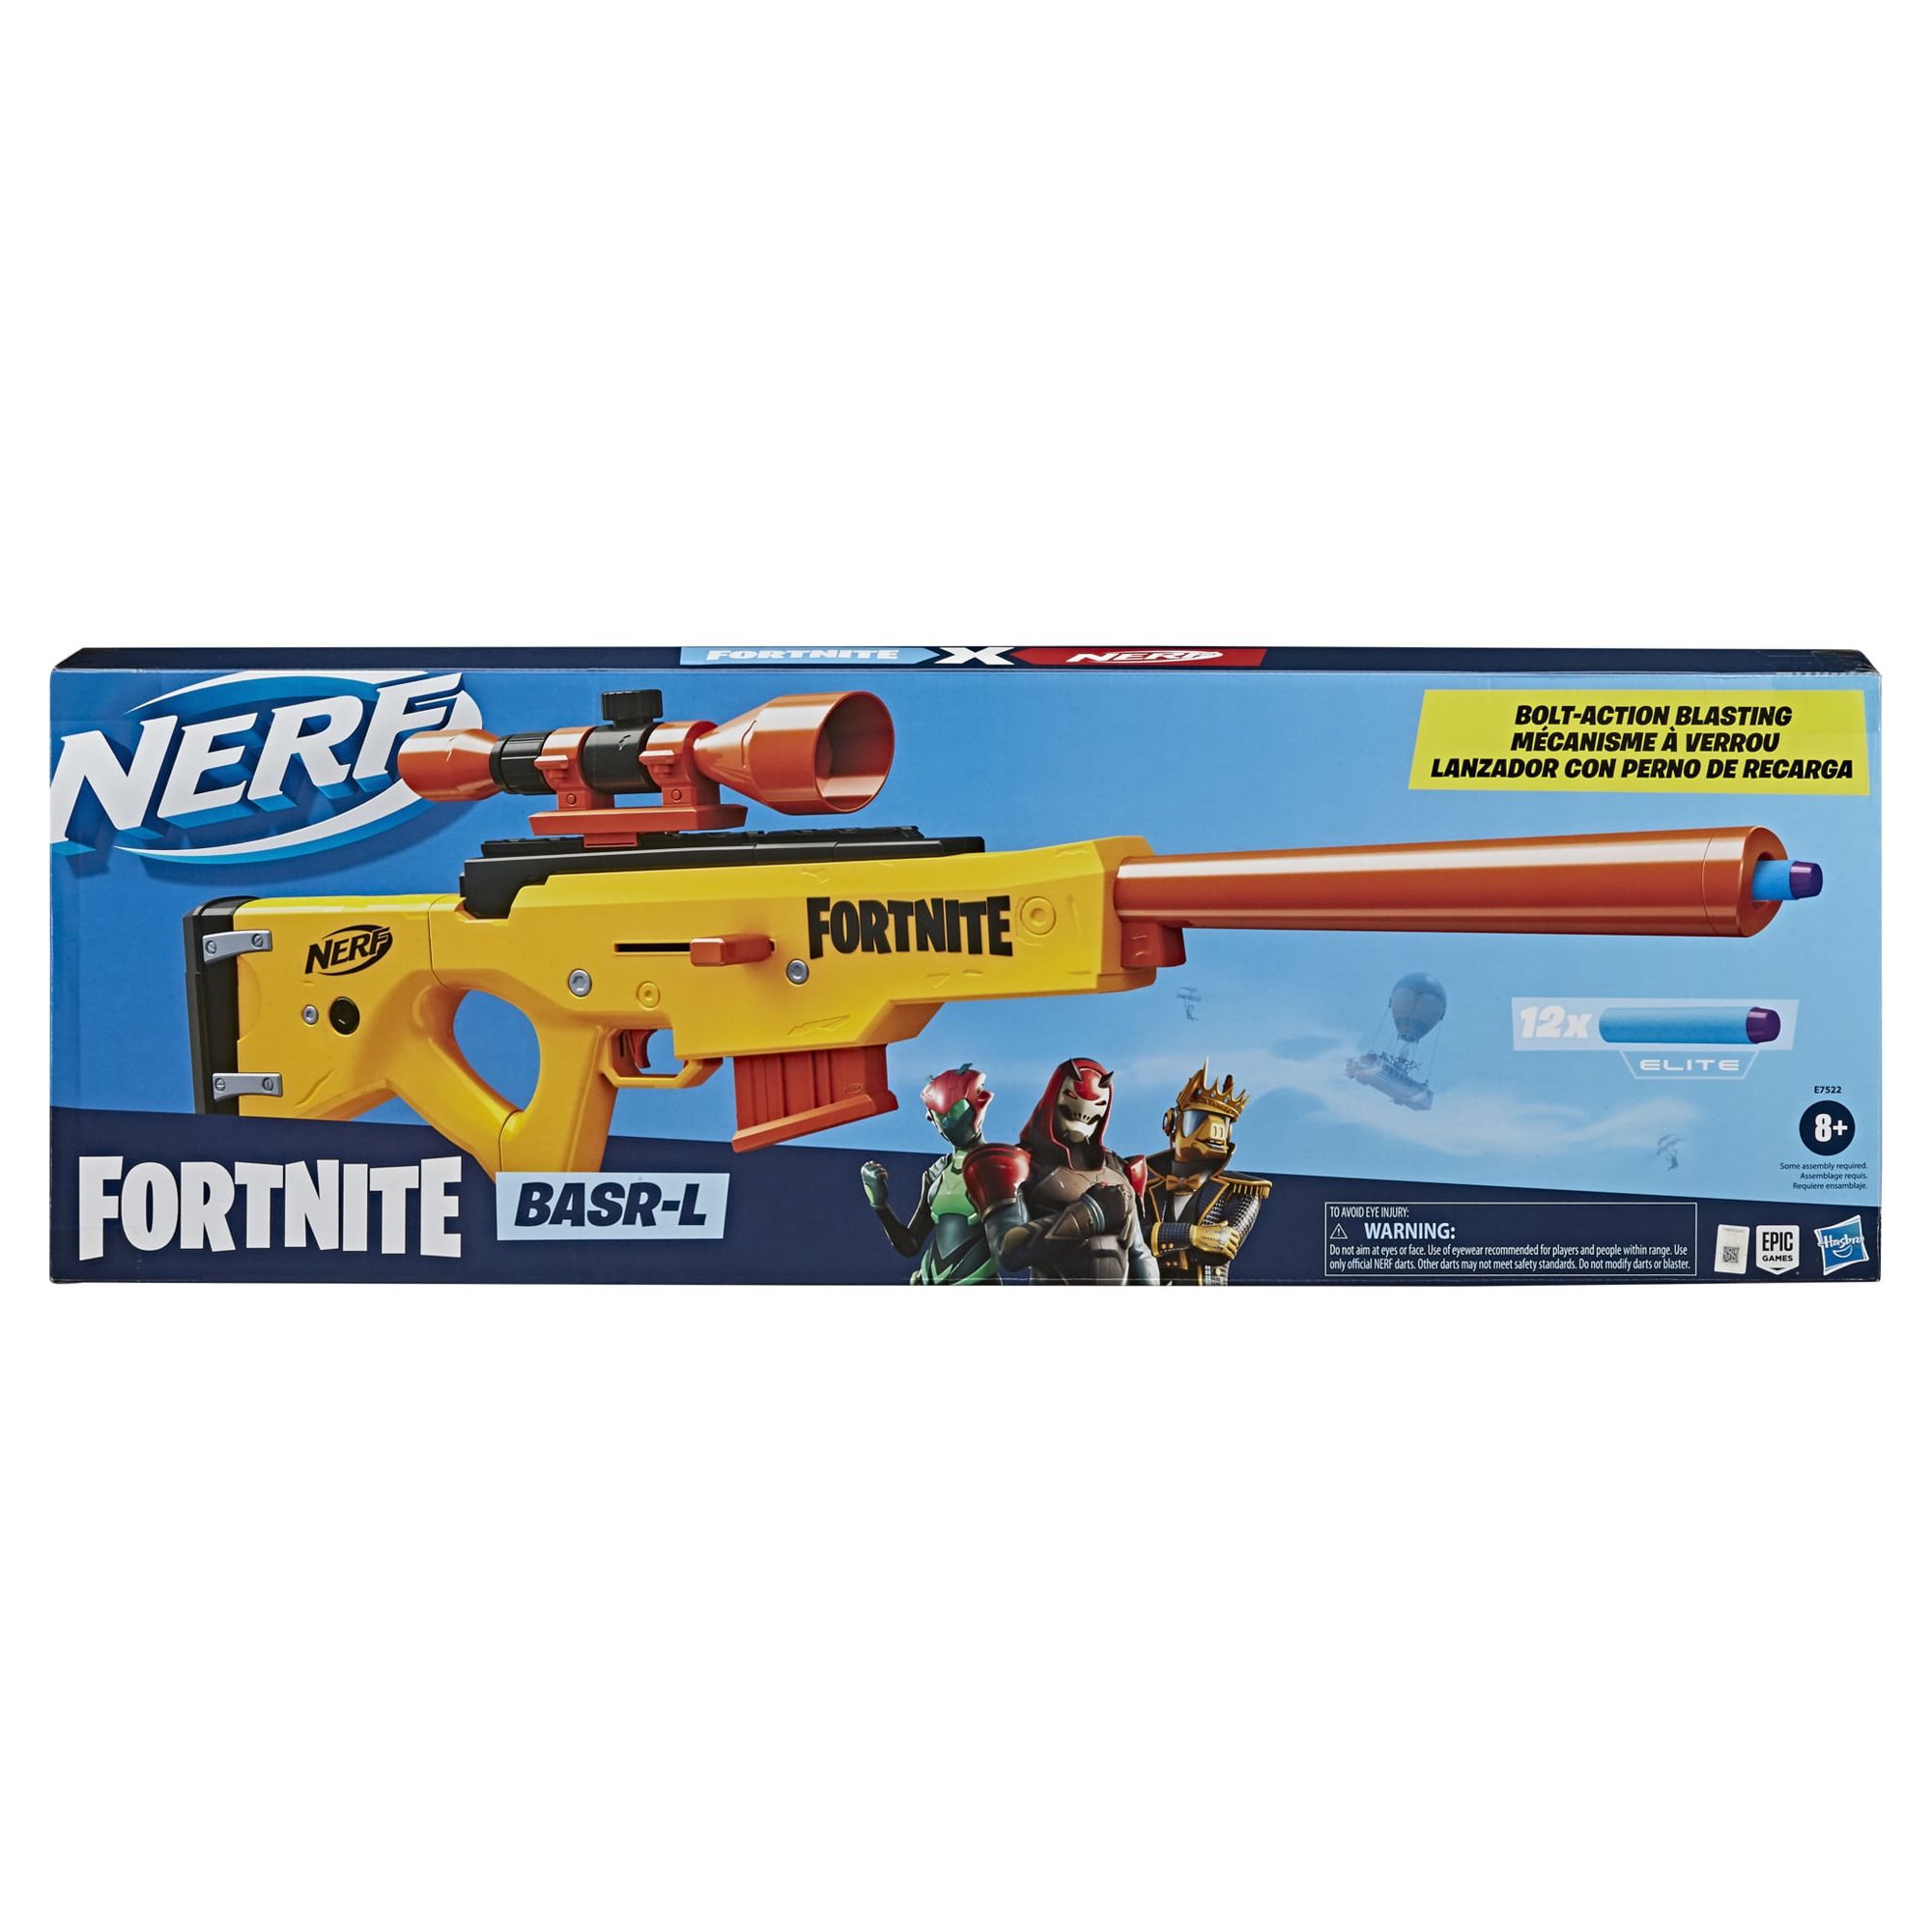 Nerf Fortnite BASR-L Blaster, Includes 12 Official Darts, Kids Toy for Boys and Girls for Ages 8+ - image 2 of 6